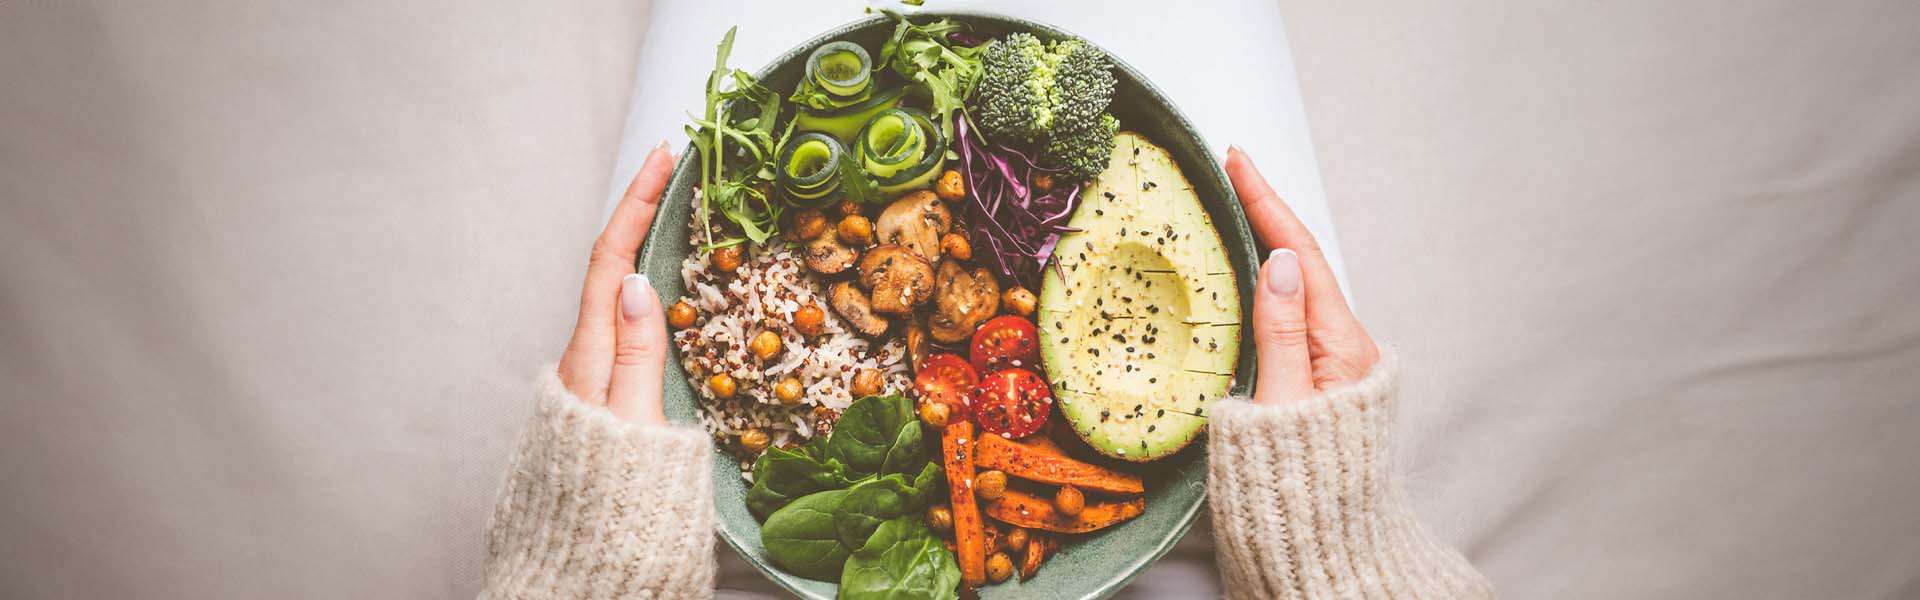 Pros and cons of the vegan diet | Yamamoto® Nutrition